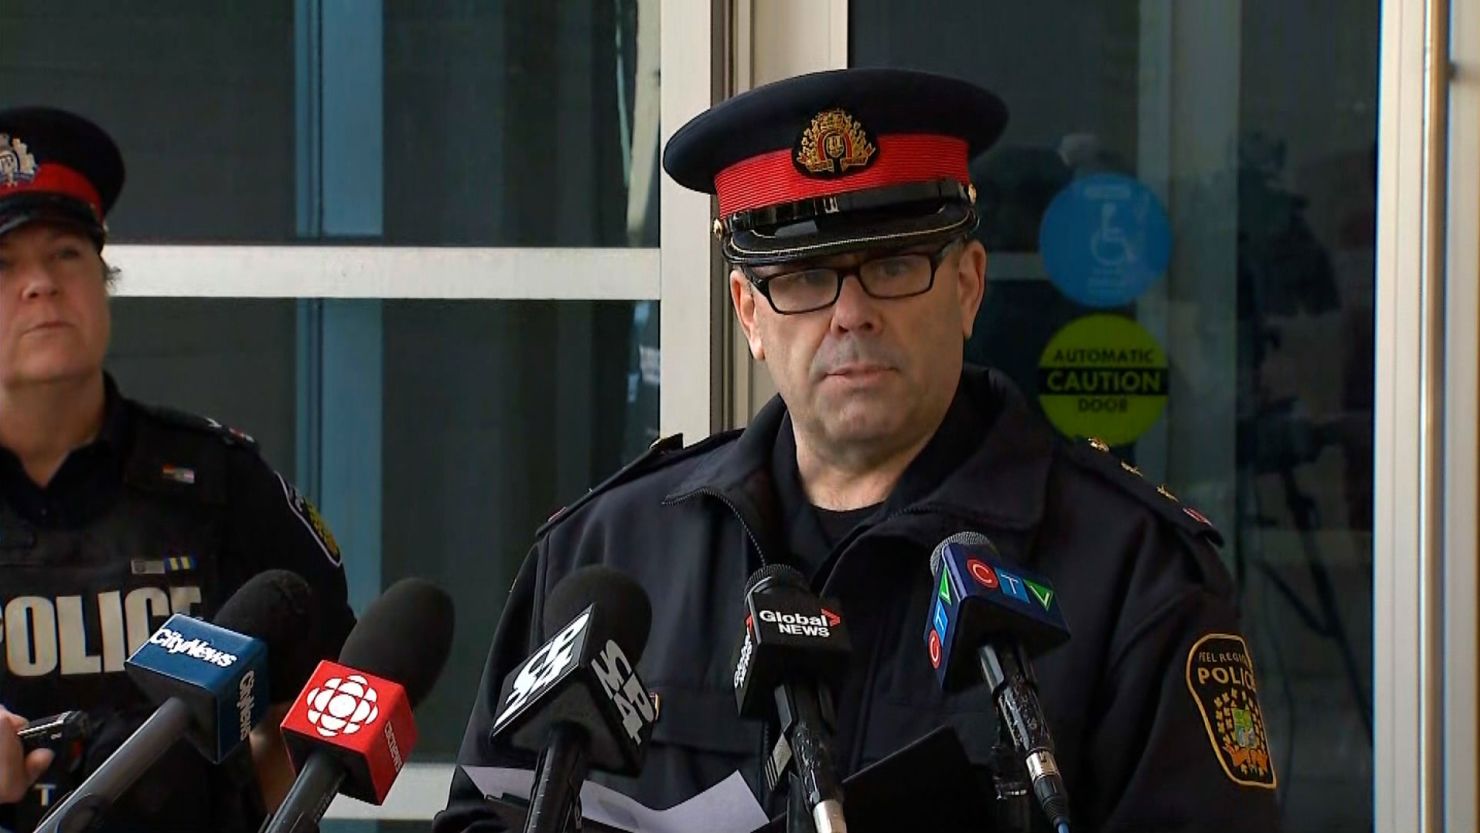 Peel Regional Police Inspector Stephen Duivesteyn spoke about the theft at a news conference Thursday.